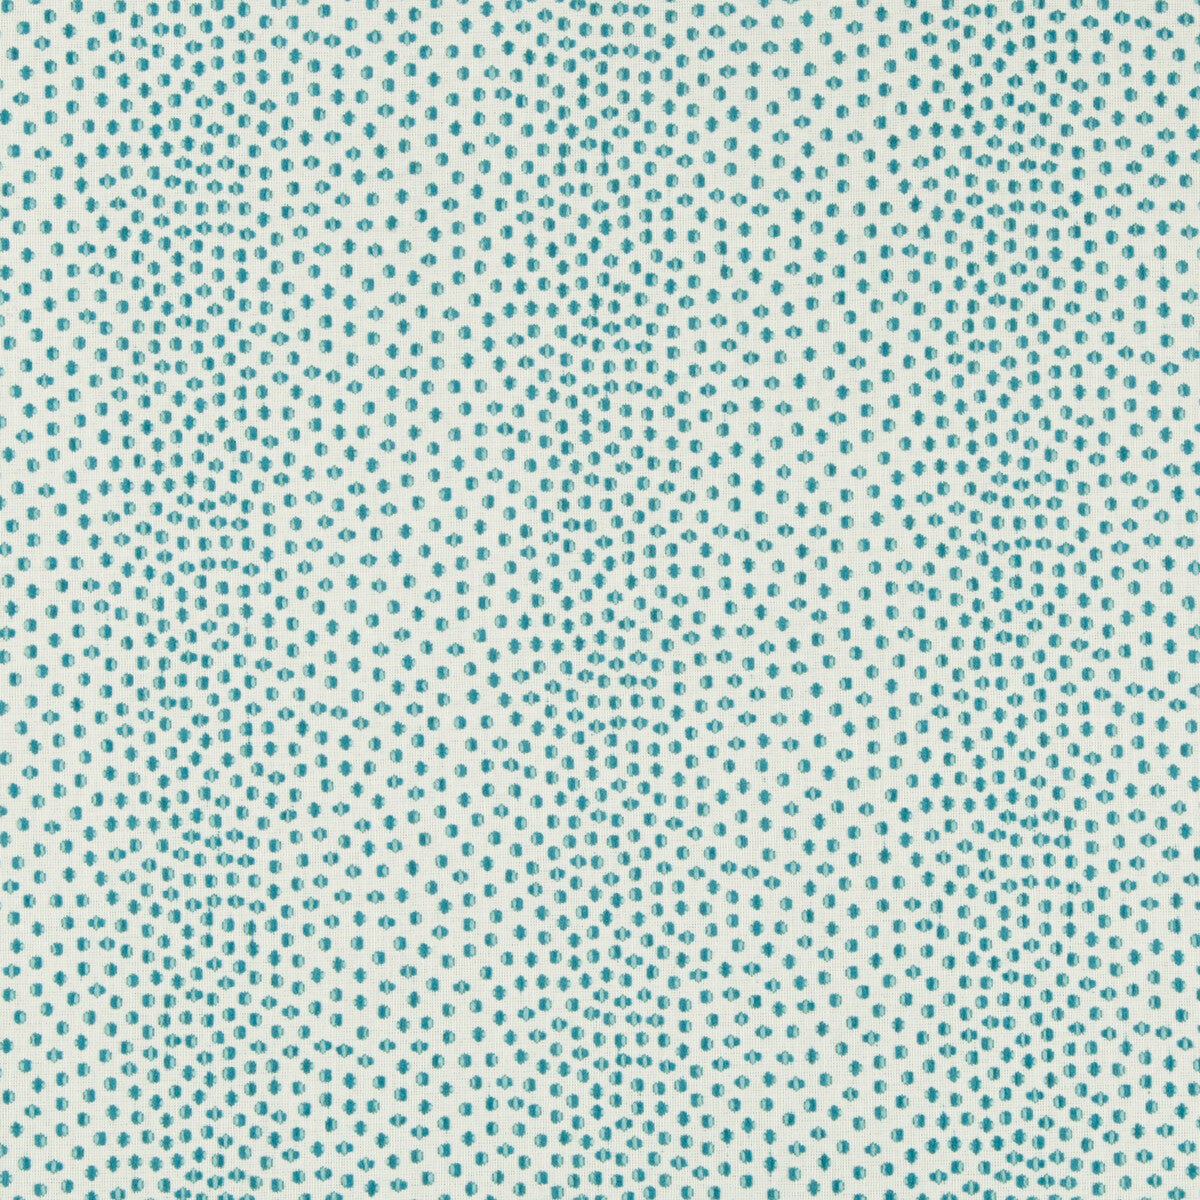 Kravet Design fabric in 34710-15 color - pattern 34710.15.0 - by Kravet Design in the Performance Crypton Home collection